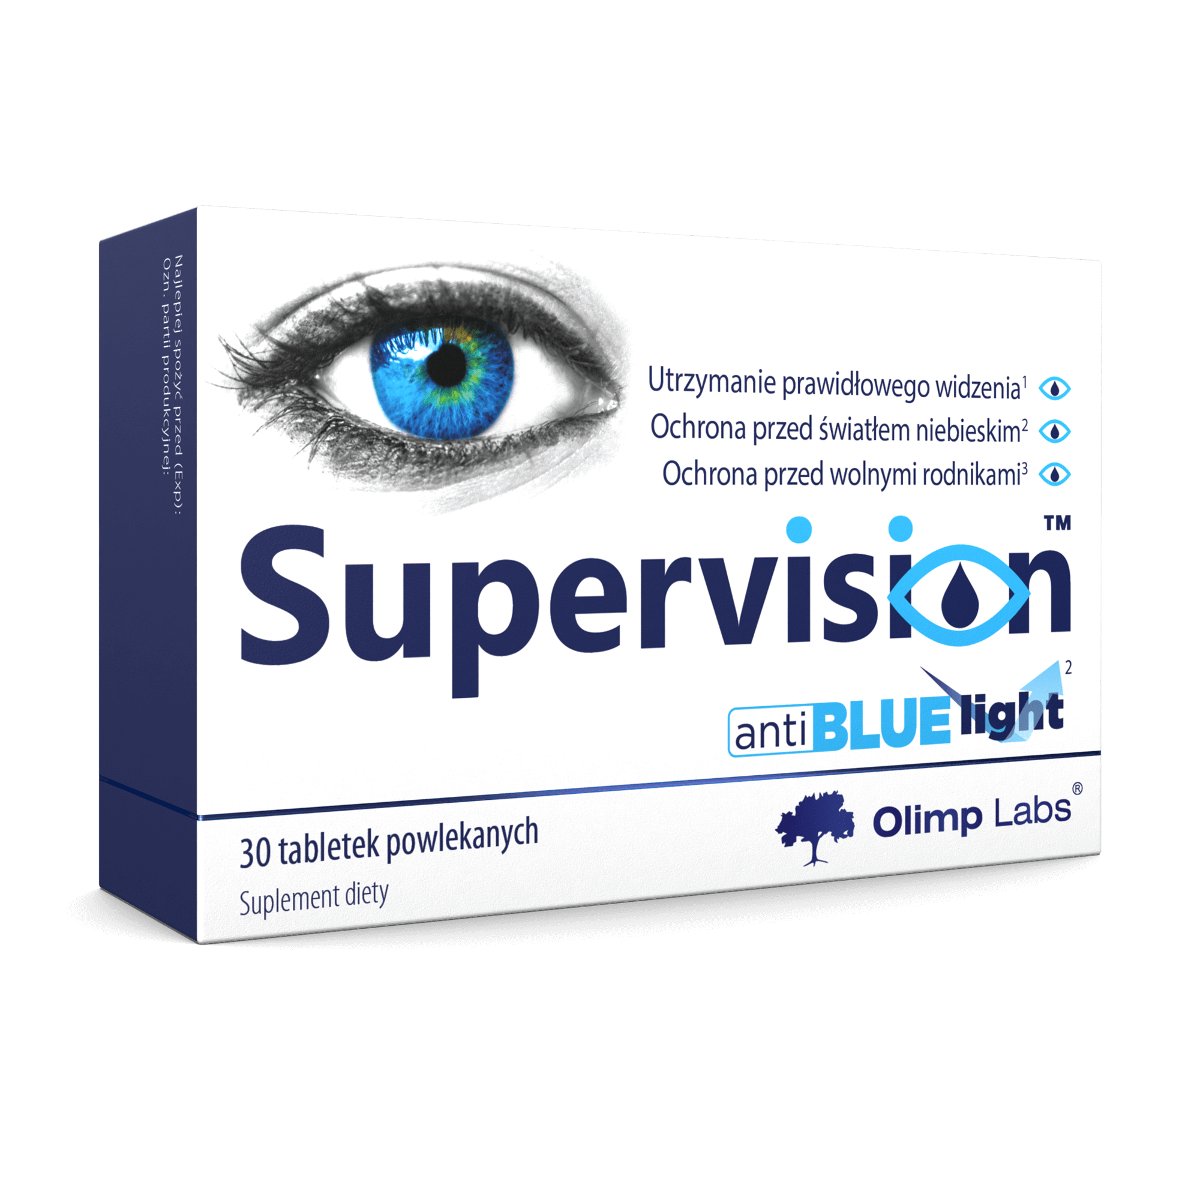 Olimp LABS Supervision x 30 tabl powlekanych